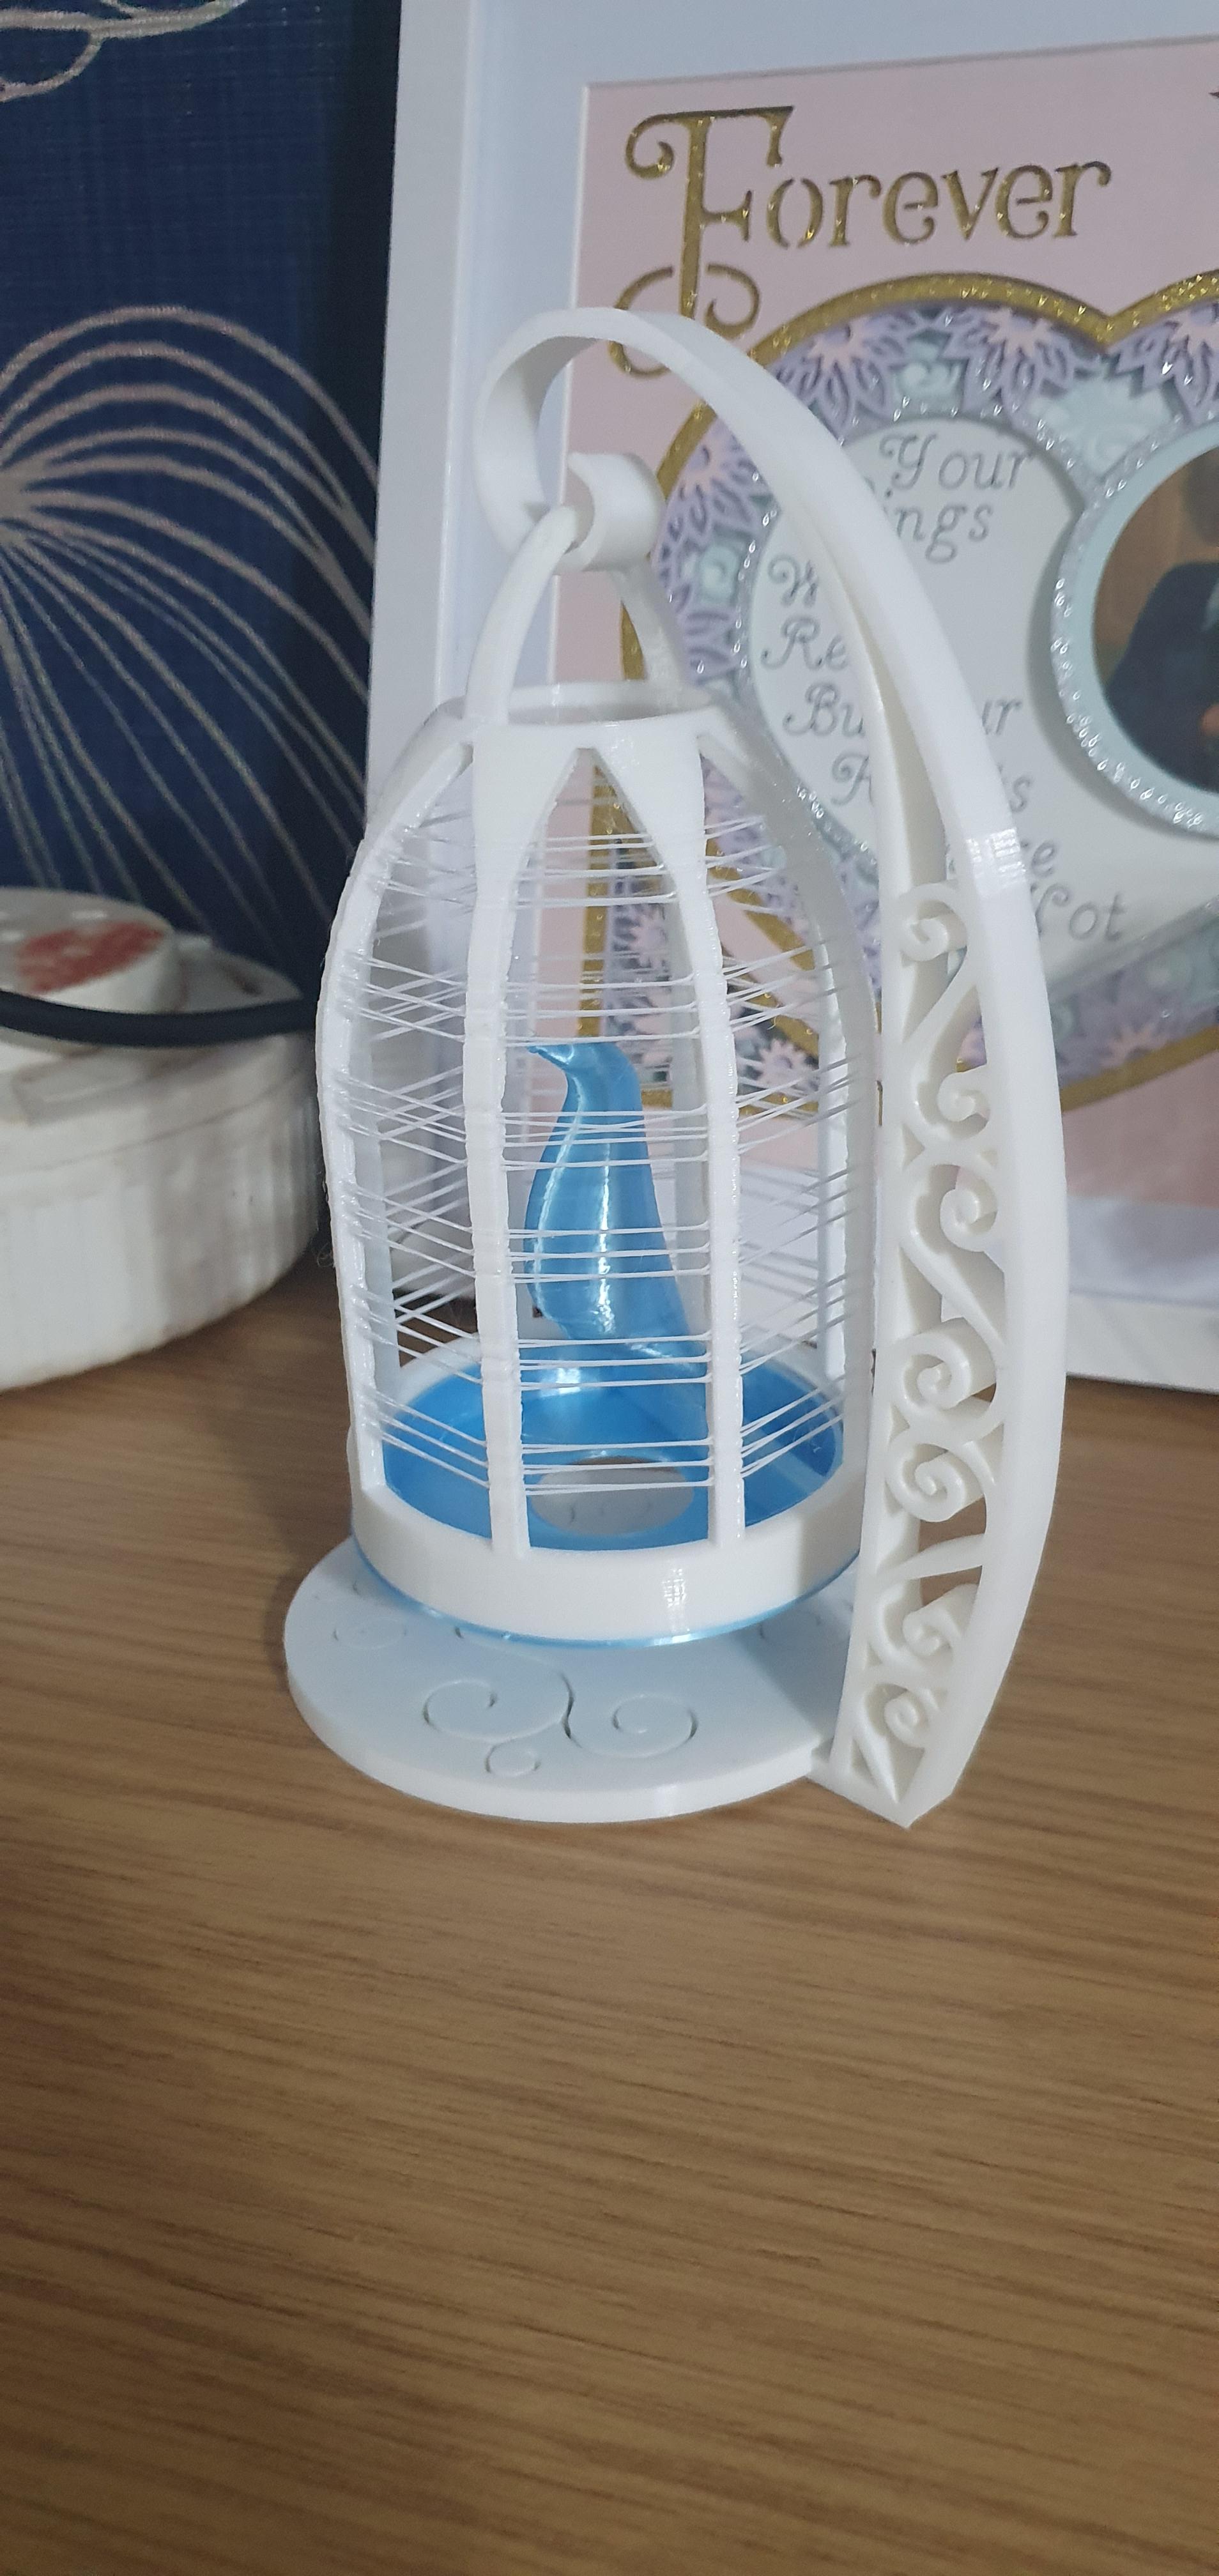 Caged Bird String Ornament 1 - Made on ender 3 pro using white and blue pla such a lovely ornamental design hats off to the designer she dos some great work 👍 👌  - 3d model